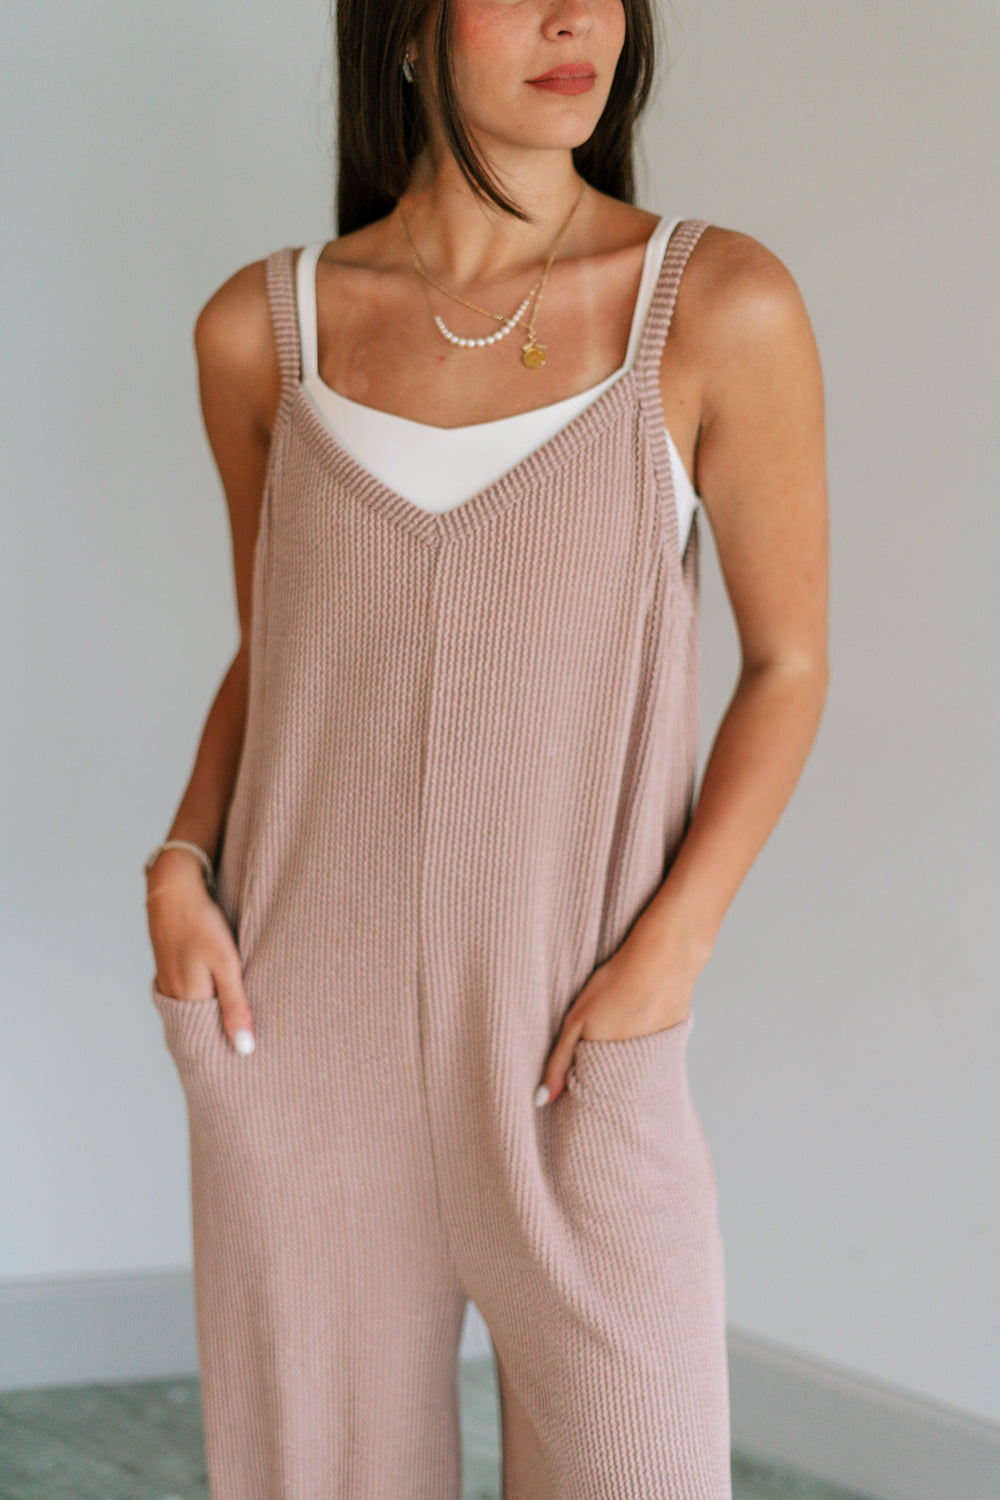 Close up view of female model wearing the Noelle Taupe Ribbed Sleeveless Jumpsuit which features Taupe Ribbed Fabric, Jogger Pant Legs, Two Side Pockets and V-Neckline